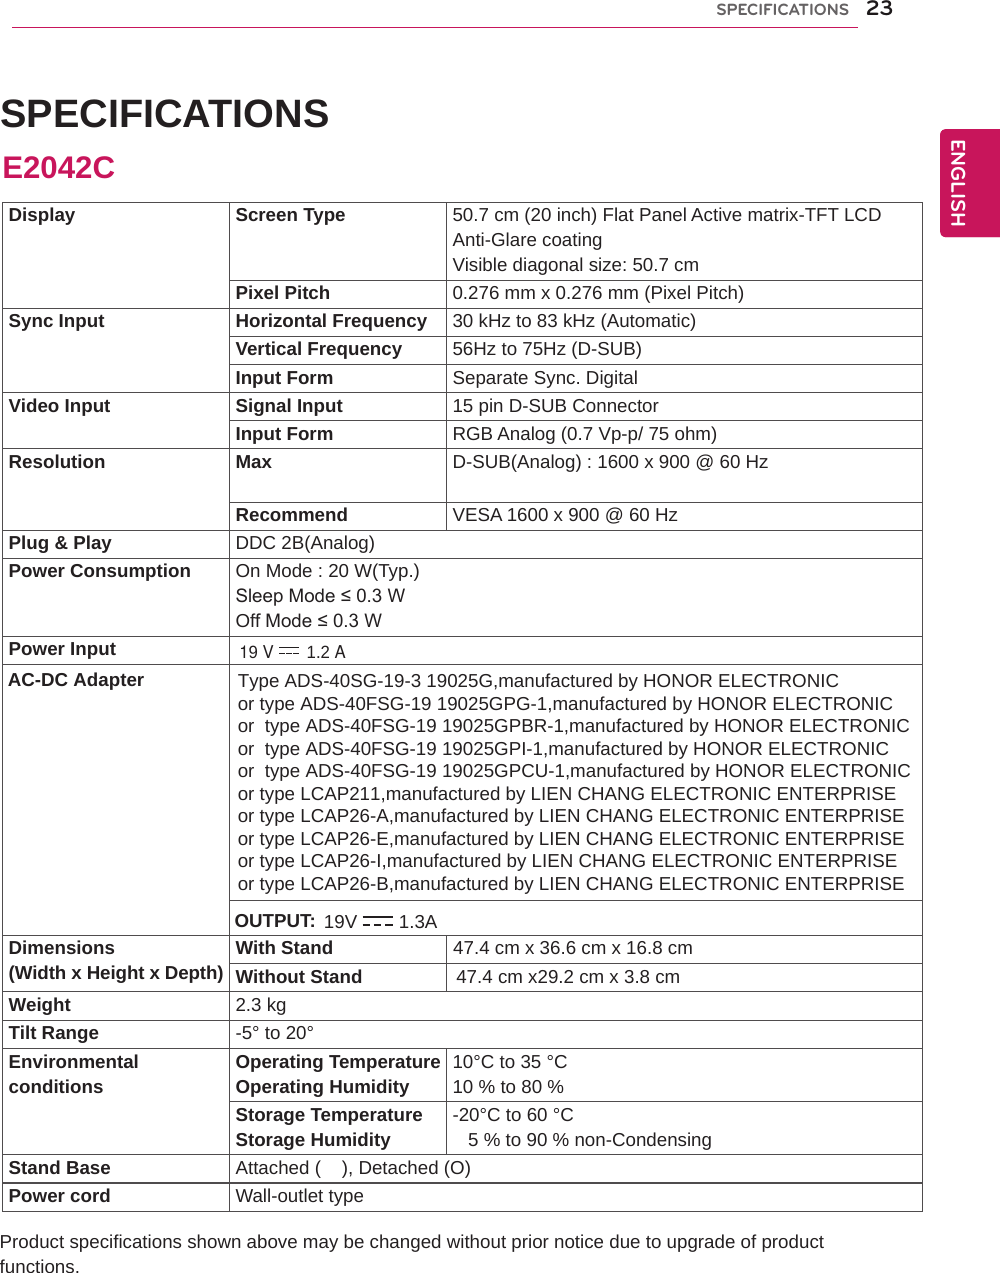 23ENGENGLISHSPECIFICATIONS SPECIFICATIONS Product specifications shown above may be changed without prior notice due to upgrade of product functions.Display Screen Type 50.7 cm (20 inch) Flat Panel Active matrix-TFT LCDAnti-Glare coatingVisible diagonal size: 50.7 cmPixel Pitch 0.276 mm x 0.276 mm (Pixel Pitch)Sync Input Horizontal Frequency 30 kHz to 83 kHz (Automatic)Vertical Frequency 56Hz to 75Hz (D-SUB)Input Form Separate Sync. DigitalVideo Input Signal Input 15 pin D-SUB ConnectorInput Form RGB Analog (0.7 Vp-p/ 75 ohm)Resolution Max D-SUB(Analog) : 1600 x 900 @ 60 HzRecommend VESA 1600 x 900 @ 60 HzPlug &amp; Play DDC 2B(Analog)Power Consumption On Mode : 20 W(Typ.)Sleep Mode ≤ 0.3 W Off Mode ≤ 0.3 W Power InputDimensions(Width x Height x Depth) With Stand                       47.4 cm x 36.6 cm x 16.8 cmWithout Stand                  47.4 cm x29.2 cm x 3.8 cmWeight 2.3 kgTilt Range -5° to 20°Environmentalconditions Operating TemperatureOperating Humidity 10°C to 35 °C10 % to 80 % Storage TemperatureStorage Humidity -20°C to 60 °C   5 % to 90 % non-CondensingStand Base Attached (    ), Detached (O)Power cord Wall-outlet typeE2042C19 V 1.2 A AC-DC Adapter Type ADS-40SG-19-3 19025G,manufactured by HONOR ELECTRONICor type ADS-40FSG-19 19025GPG-1,manufactured by HONOR ELECTRONICor  type ADS-40FSG-19 19025GPBR-1,manufactured by HONOR ELECTRONICor  type ADS-40FSG-19 19025GPI-1,manufactured by HONOR ELECTRONICor  type ADS-40FSG-19 19025GPCU-1,manufactured by HONOR ELECTRONICor type LCAP211,manufactured by LIEN CHANG ELECTRONIC ENTERPRISEor type LCAP26-A,manufactured by LIEN CHANG ELECTRONIC ENTERPRISEor type LCAP26-E,manufactured by LIEN CHANG ELECTRONIC ENTERPRISEor type LCAP26-I,manufactured by LIEN CHANG ELECTRONIC ENTERPRISEor type LCAP26-B,manufactured by LIEN CHANG ELECTRONIC ENTERPRISE OUTPUT: 19V 1.3A